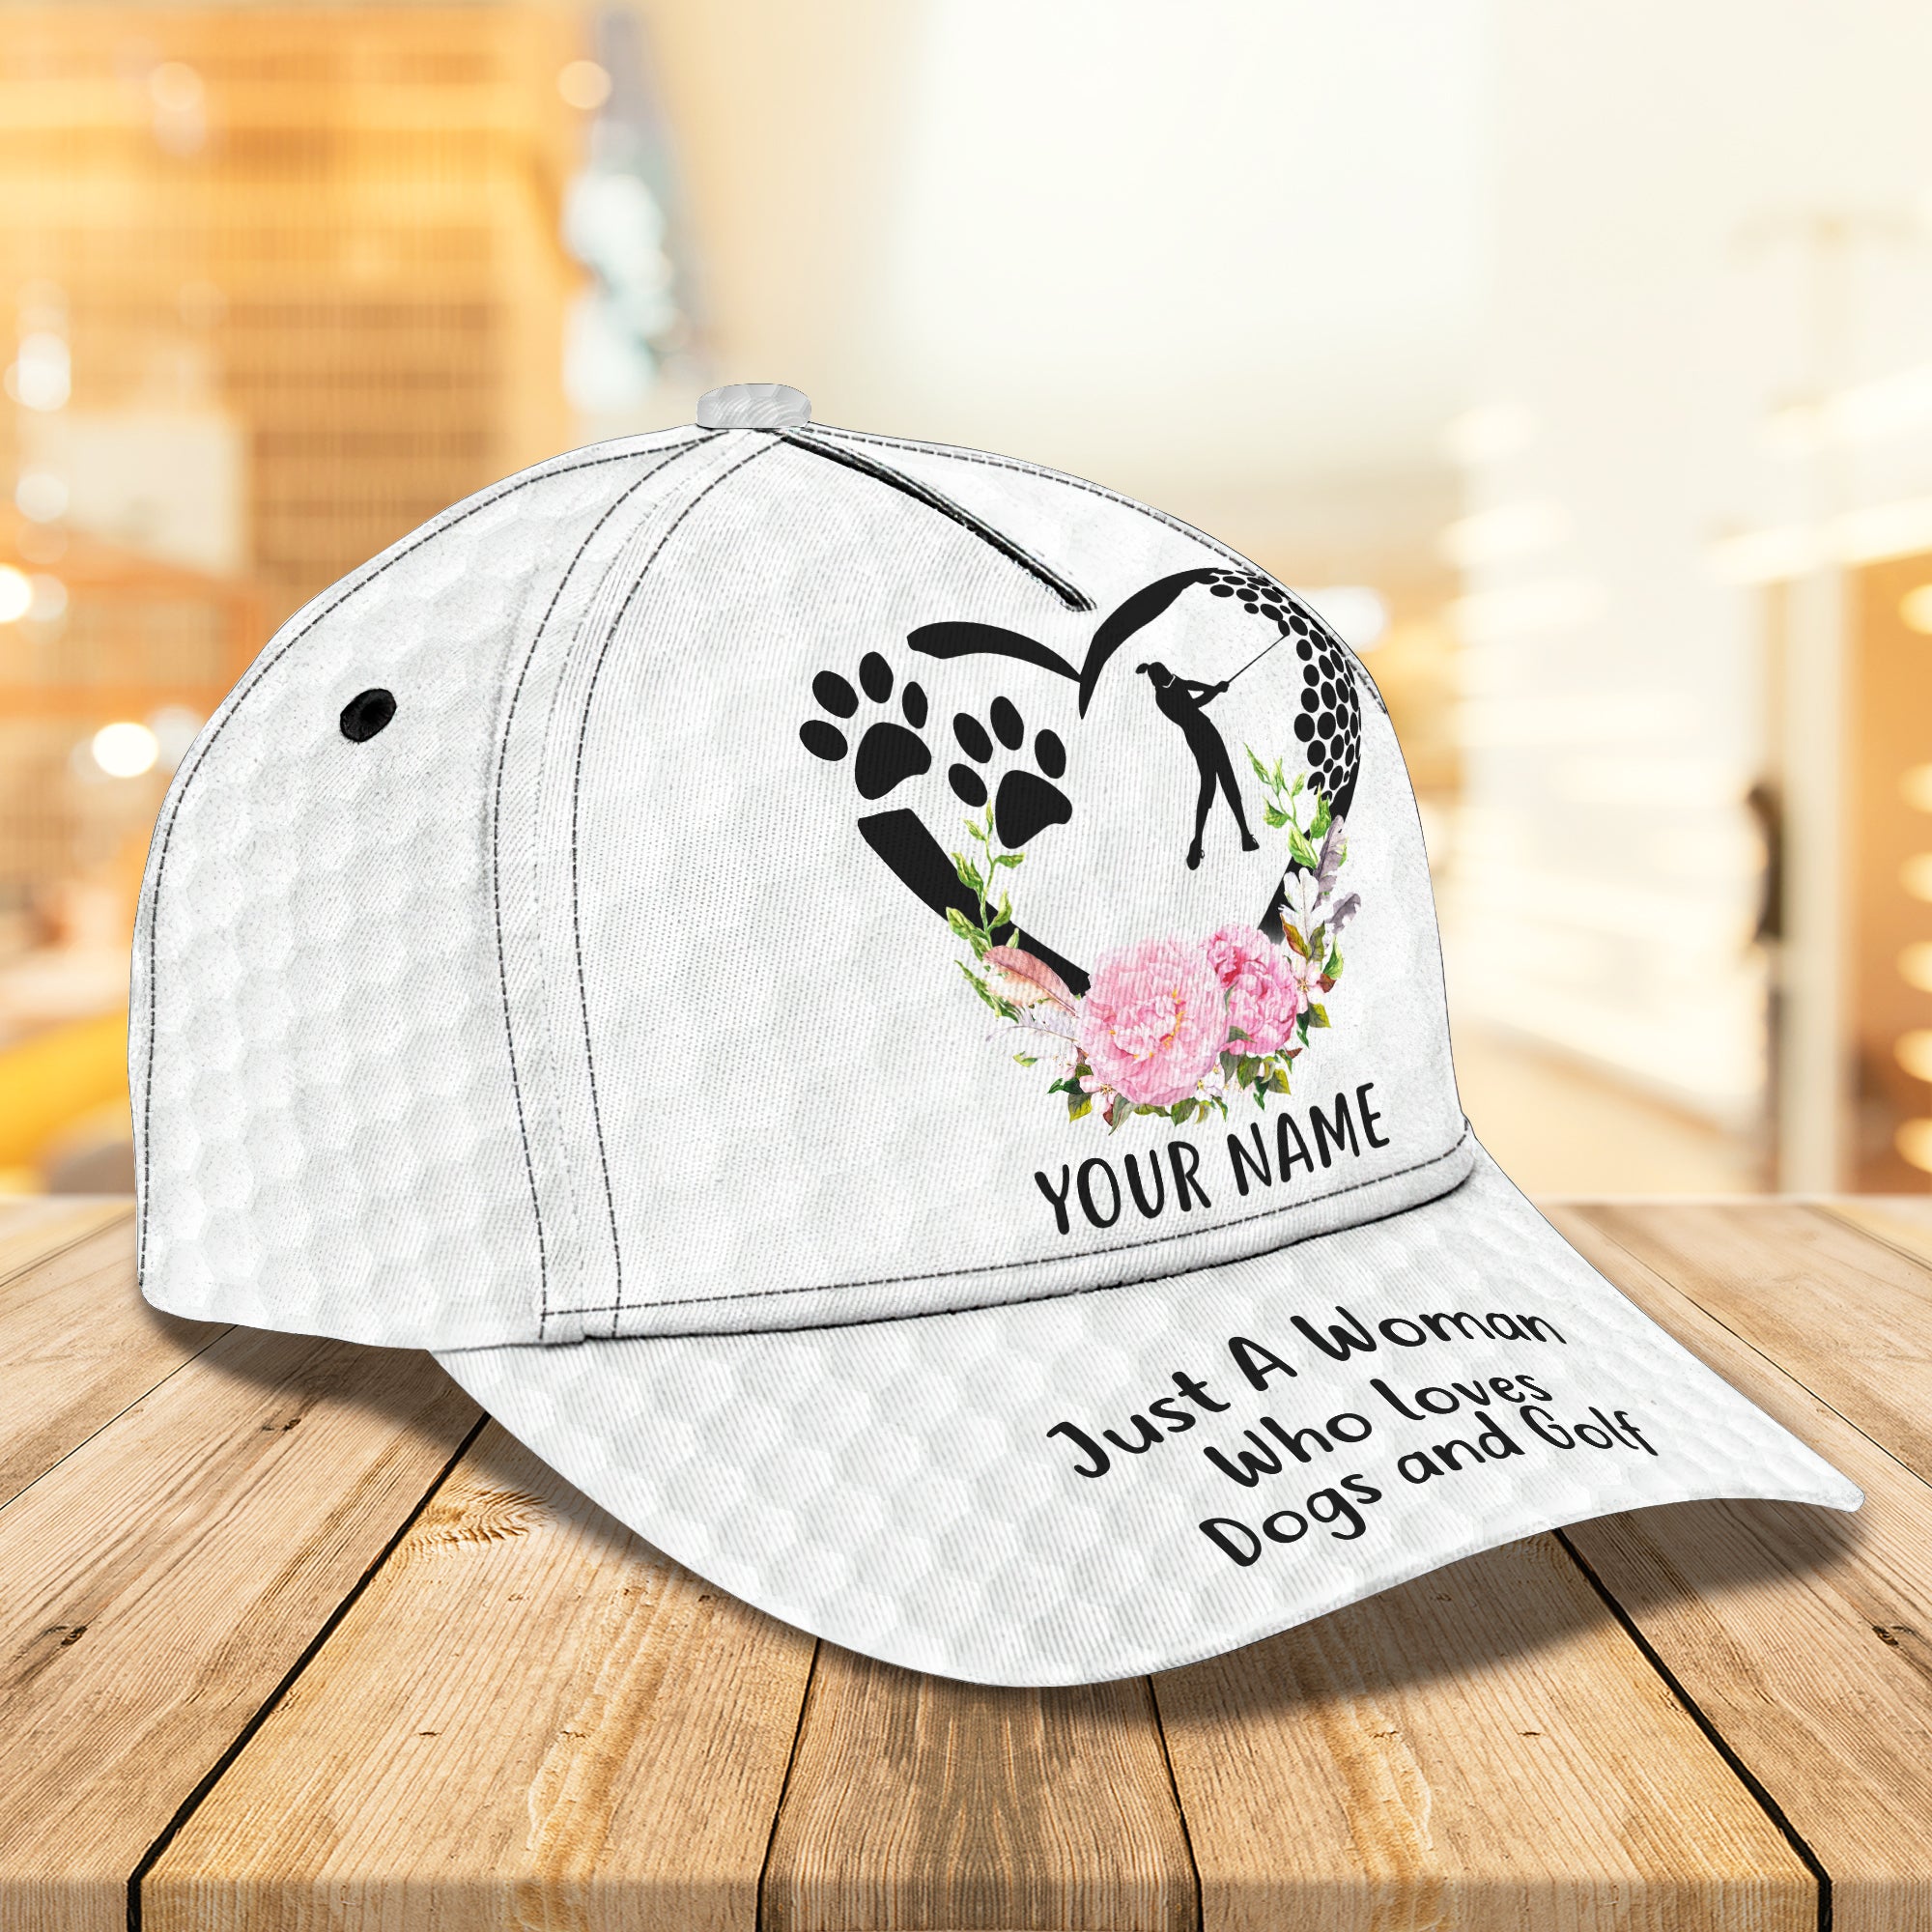 Golf - Personalized Name Cap - DAT93-016